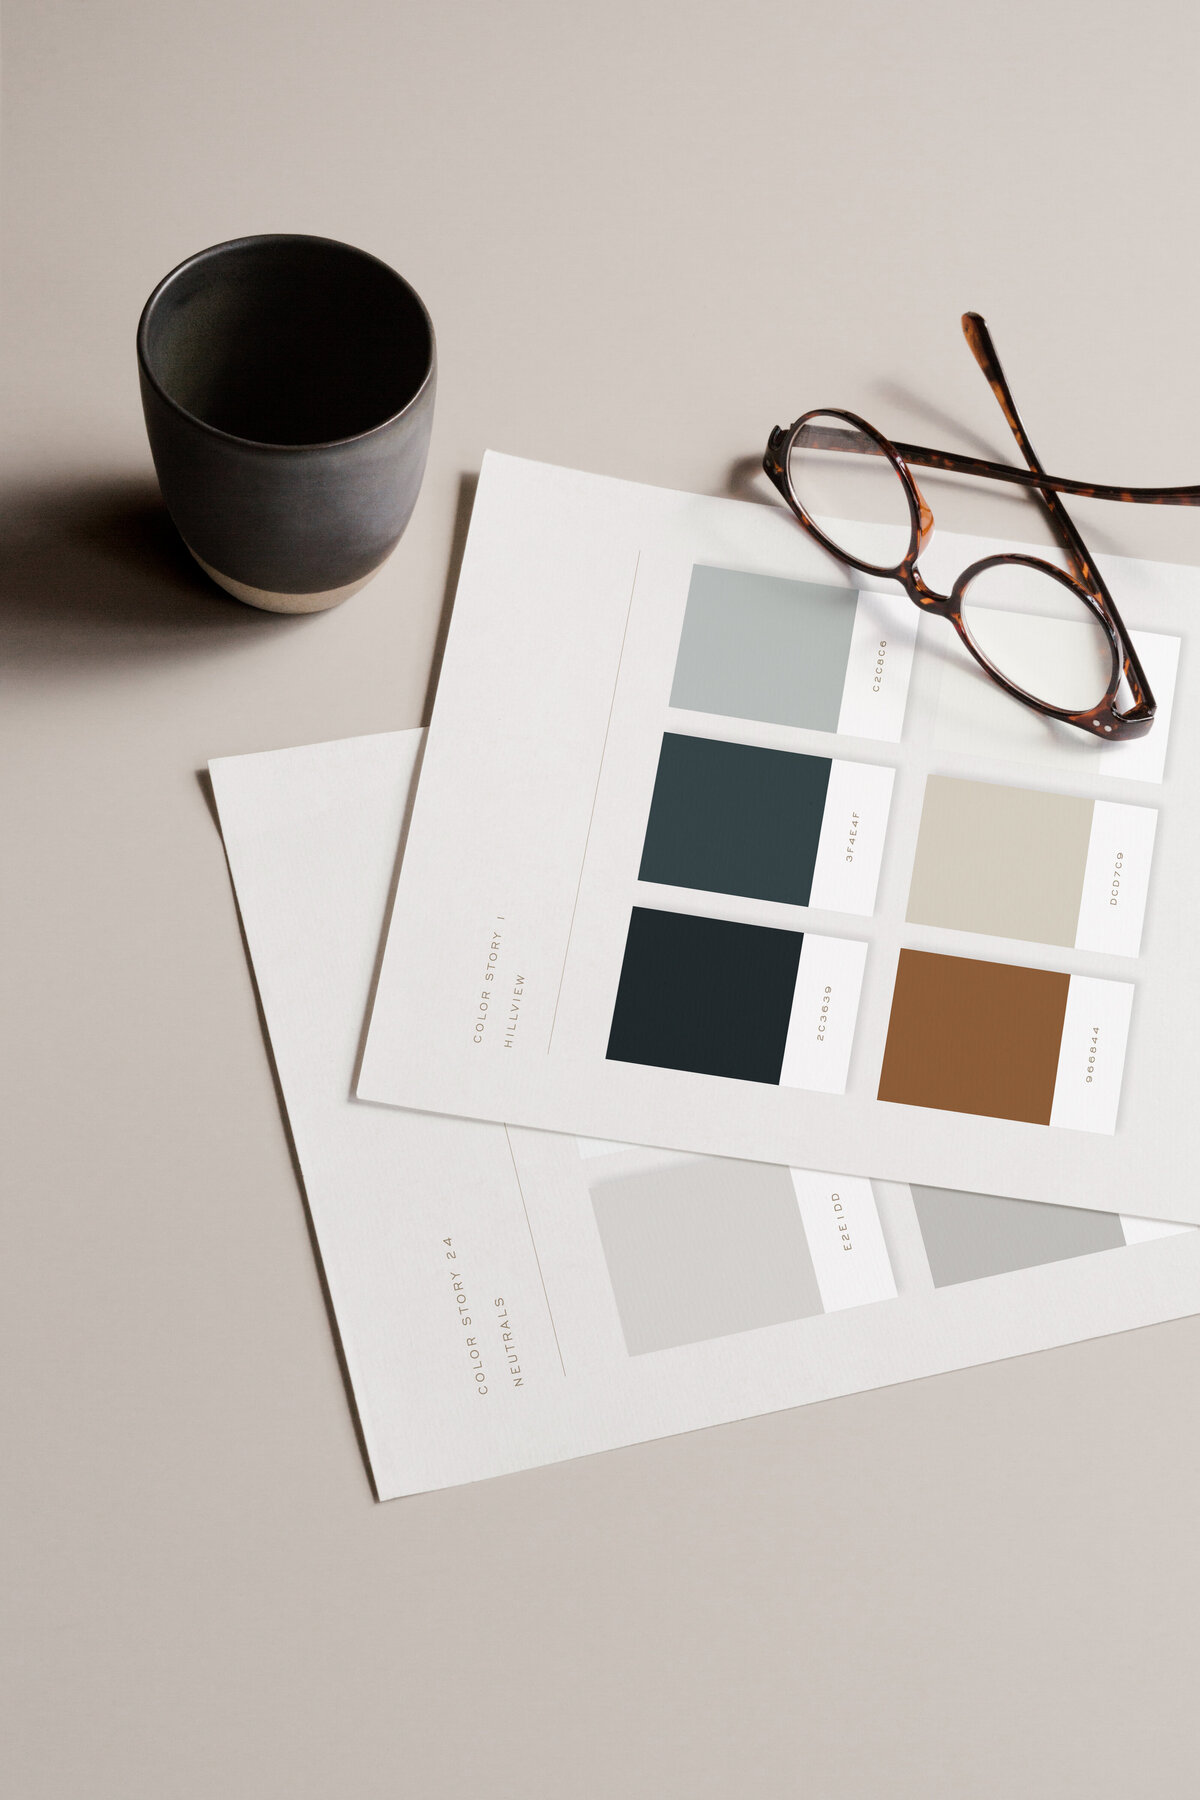 Free Resource for Designers: Curated Color Palettes for Intentional Design